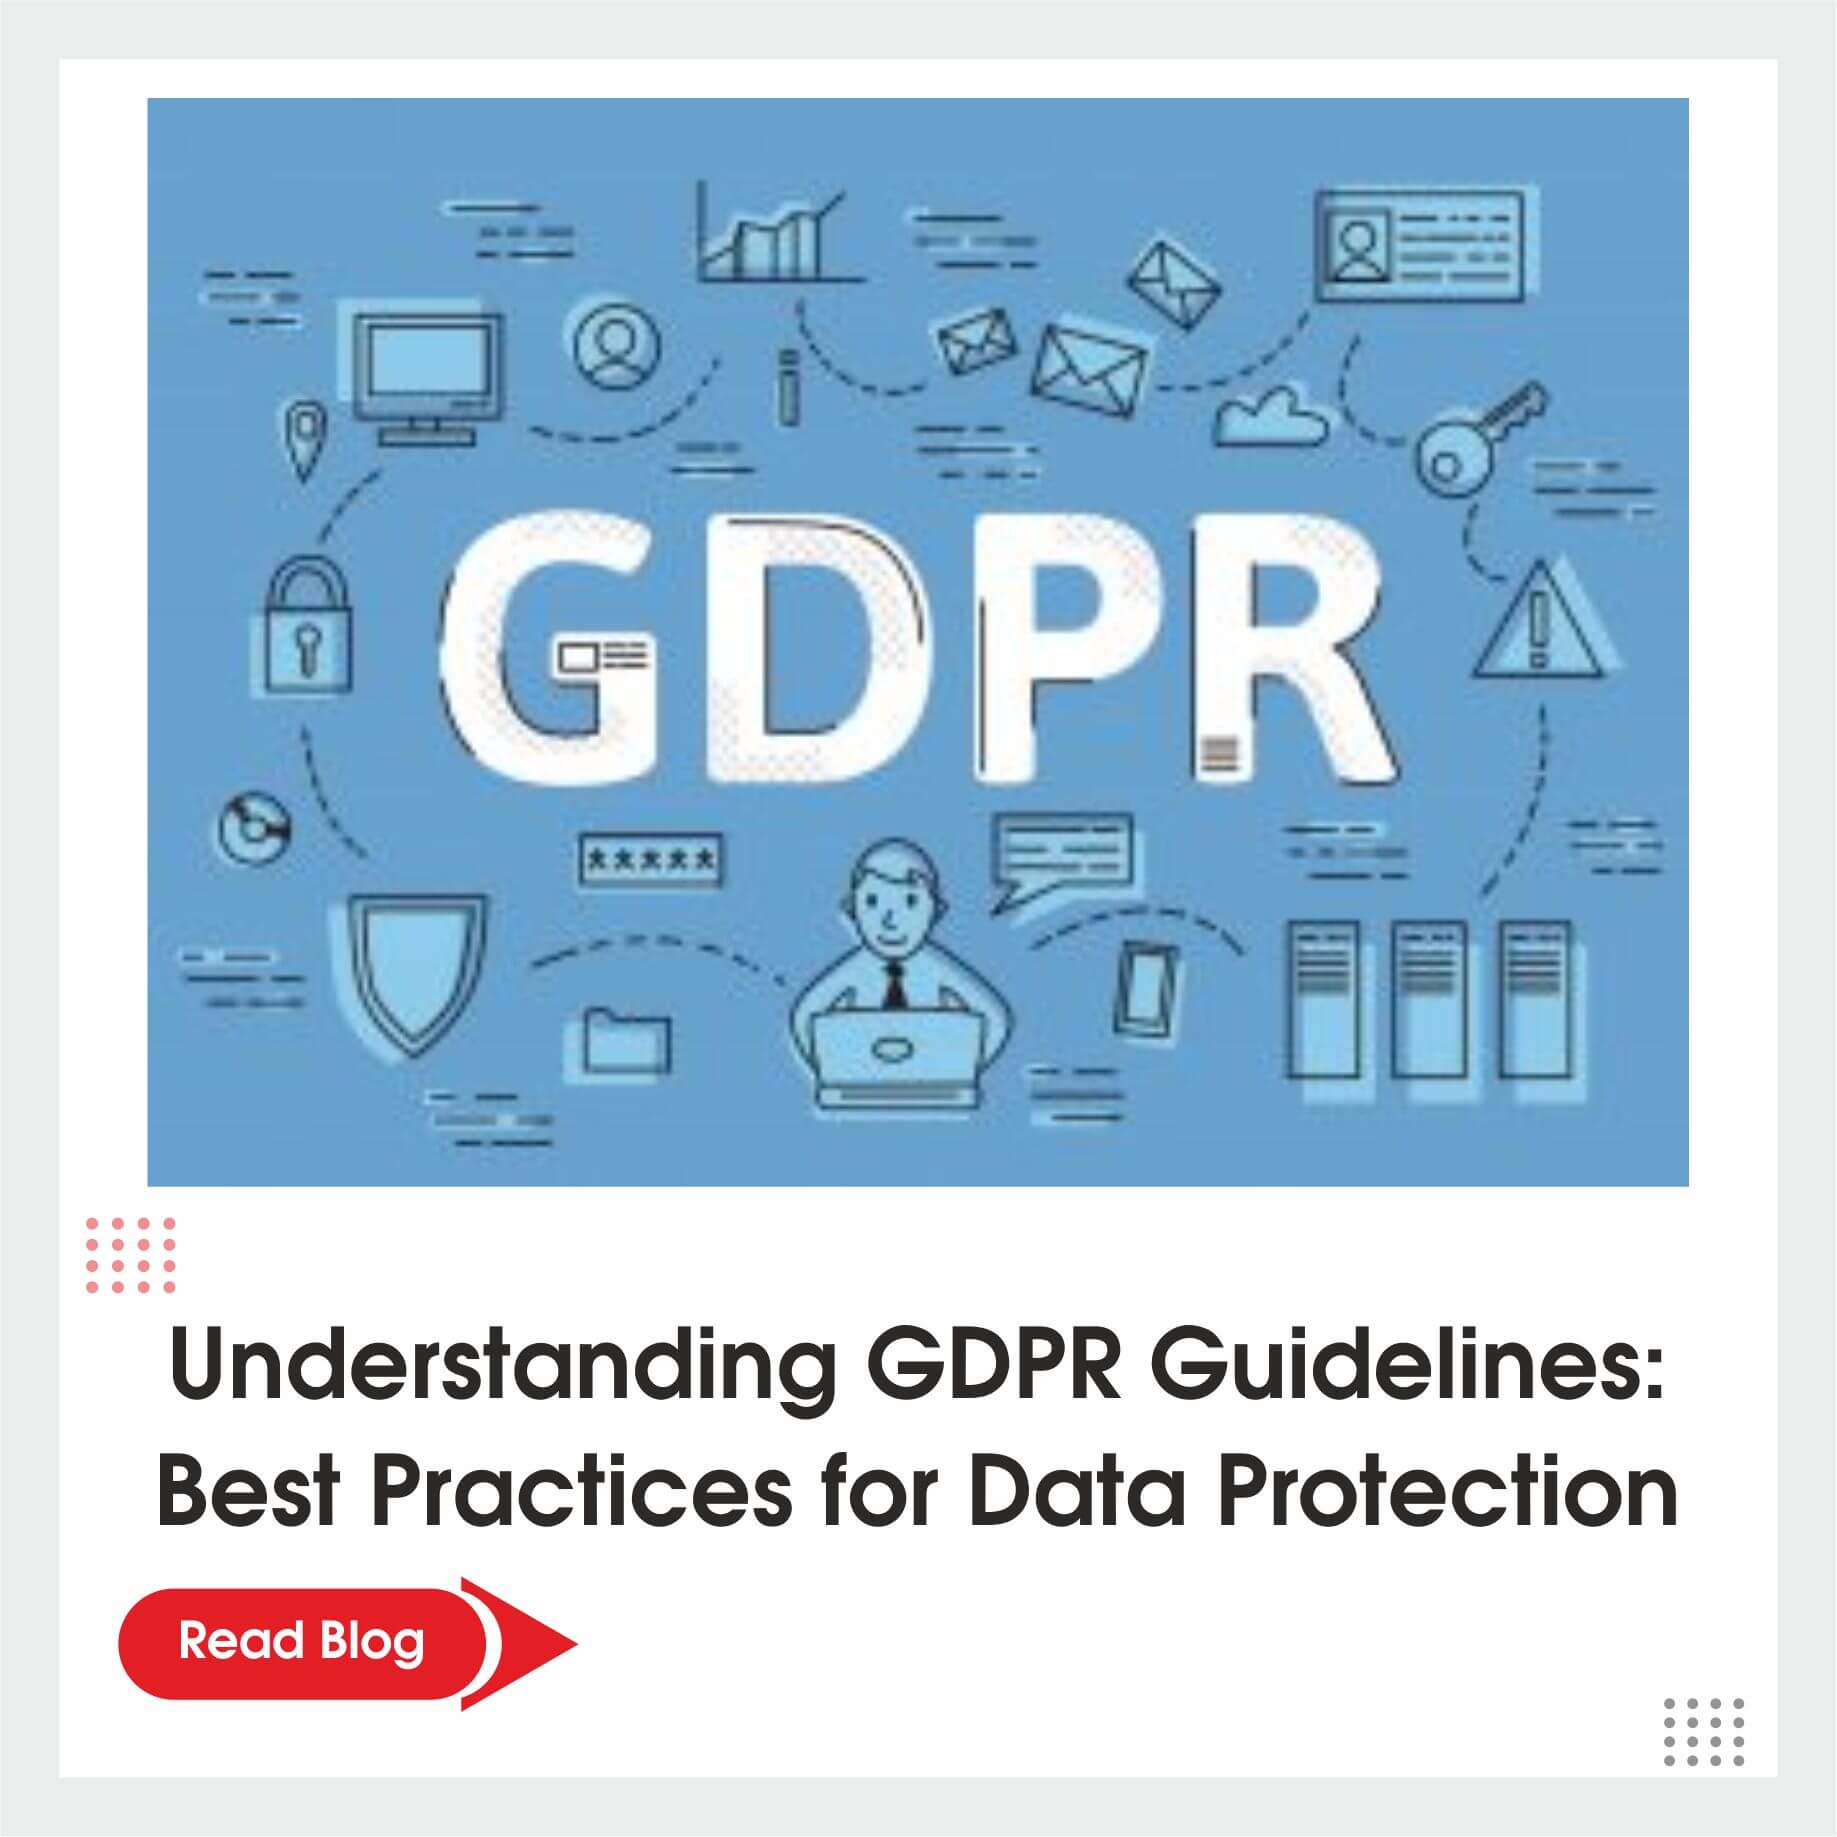 Understanding GDPR Guidelines: Best Practices for Data Protection